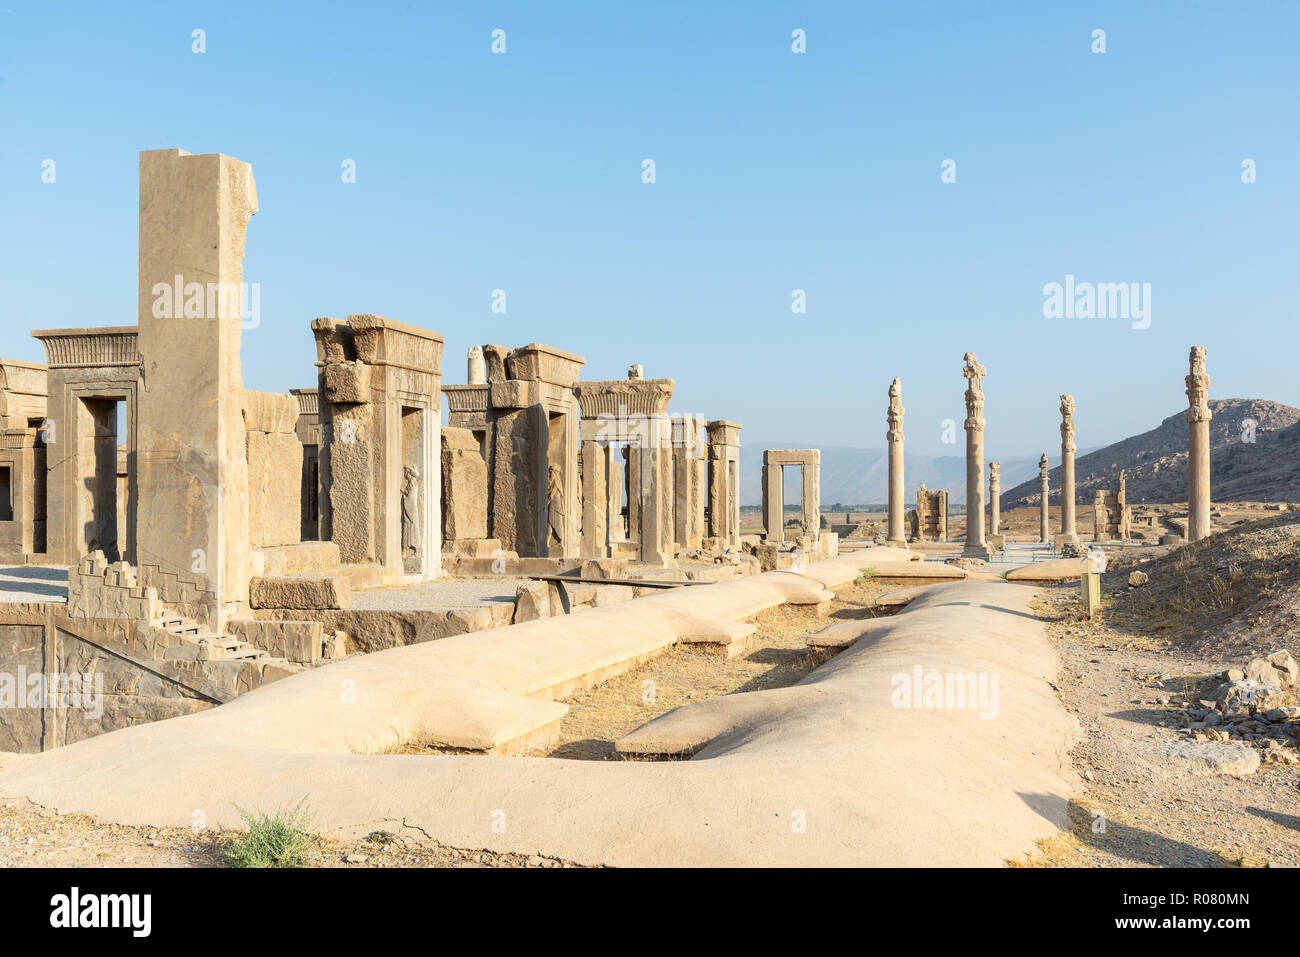 Ancient ruins of Persepolis, Iran - one of the UNESCO world heritage sites Stock Photo